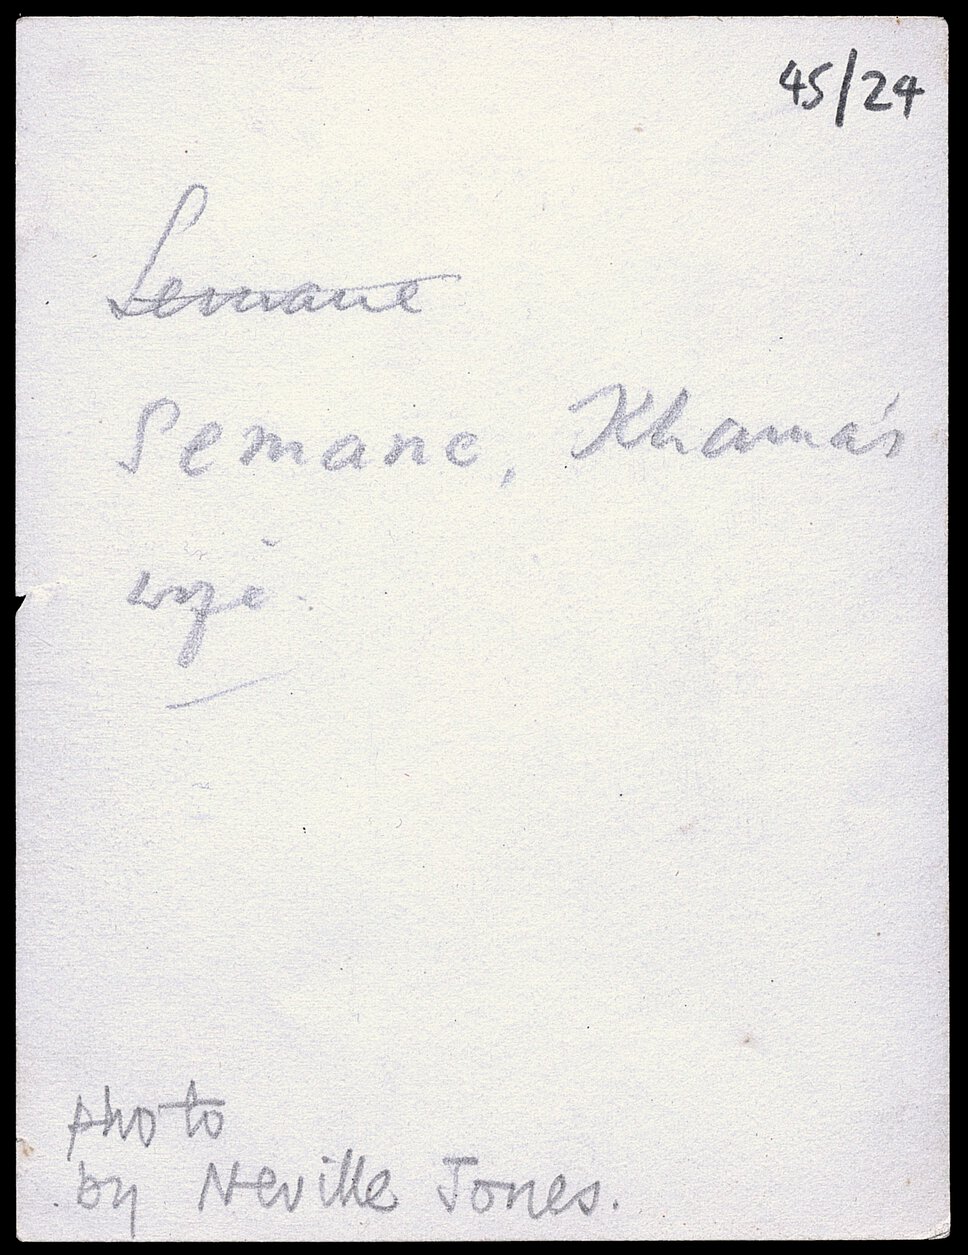 Verso of image, stating that image is of “Semane, Khama's wife” and “Photo by Neville Jones.”